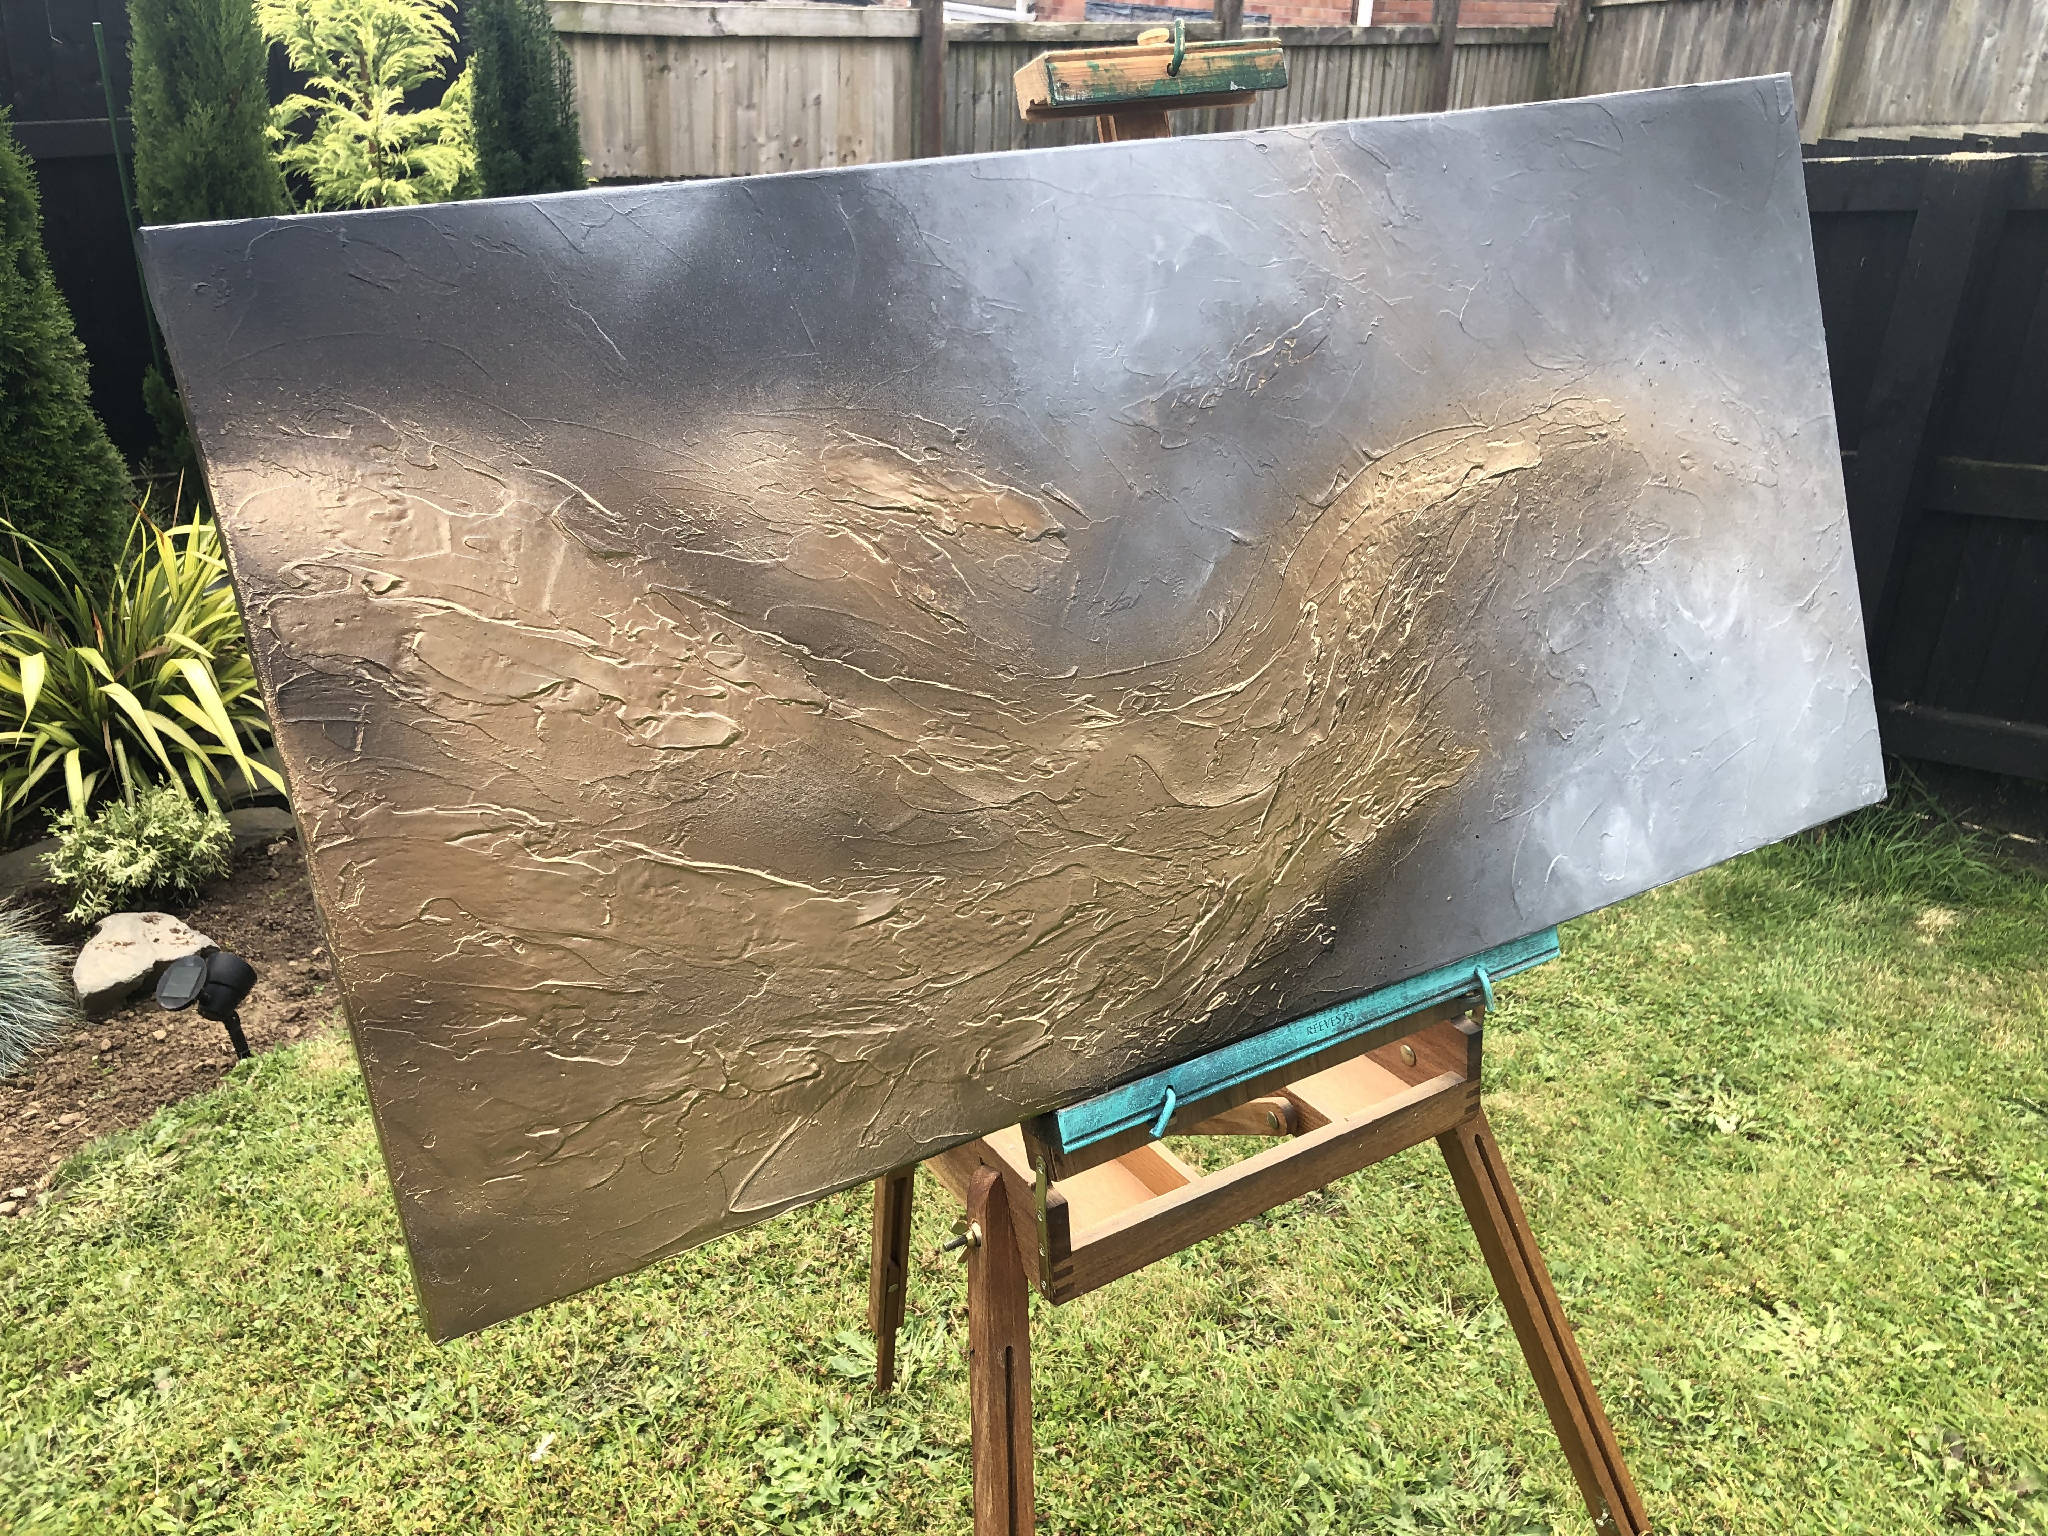 STORMY SEA - Dramatic mixed media acrylic canvas in greys and gold (100x50x4cm)